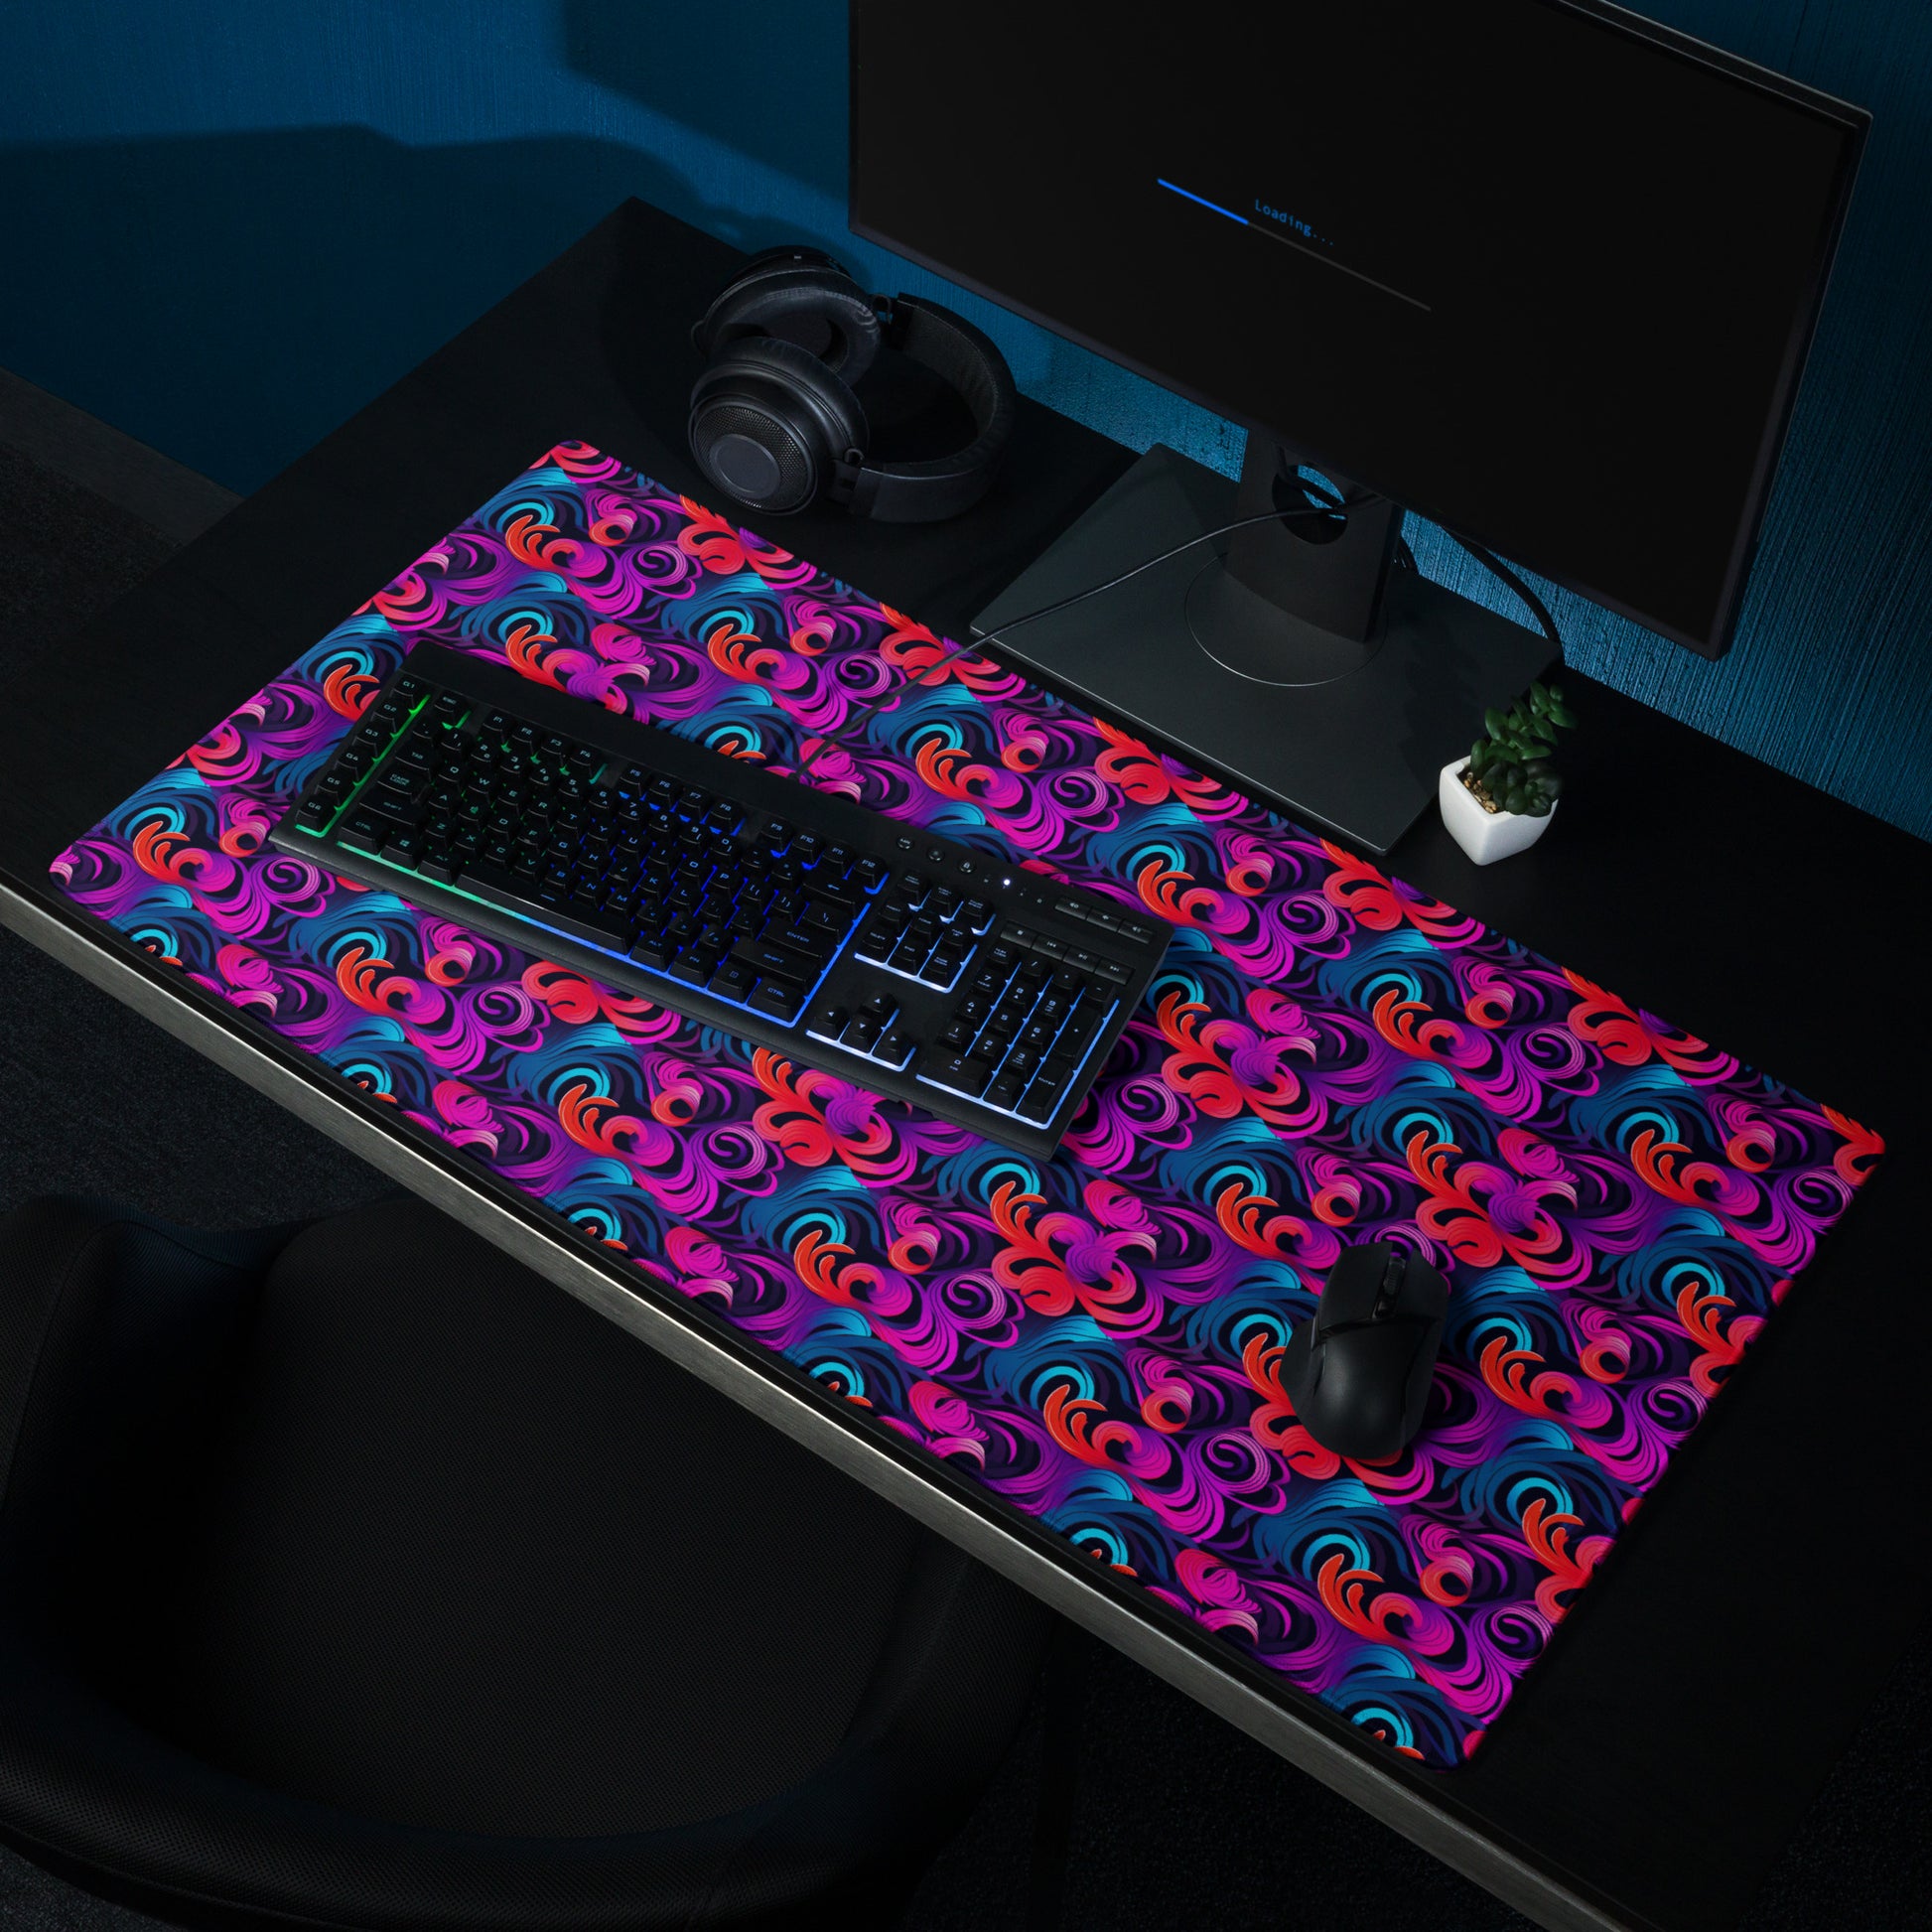 A 36" x 18" desk pad with a bright floral pattern all over it shown at a desk setup. Blue, Purple and Red in color.